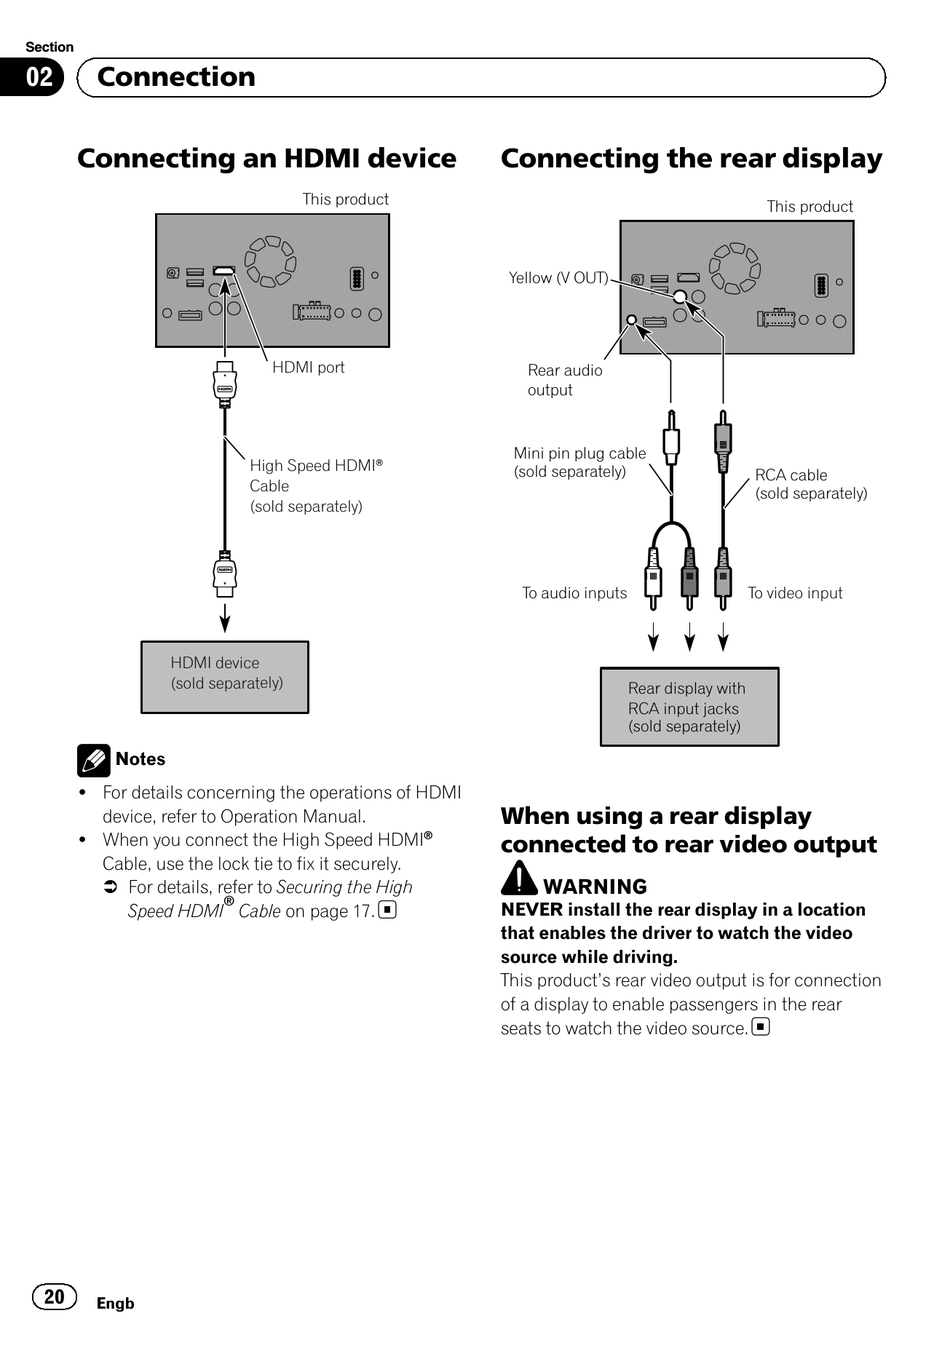 Connecting An Hdmi Device; Connecting The Rear Display; When Using A Rear Display Connected To Video - Pioneer SPH-DA120 Installation Manual [Page 20] | ManualsLib